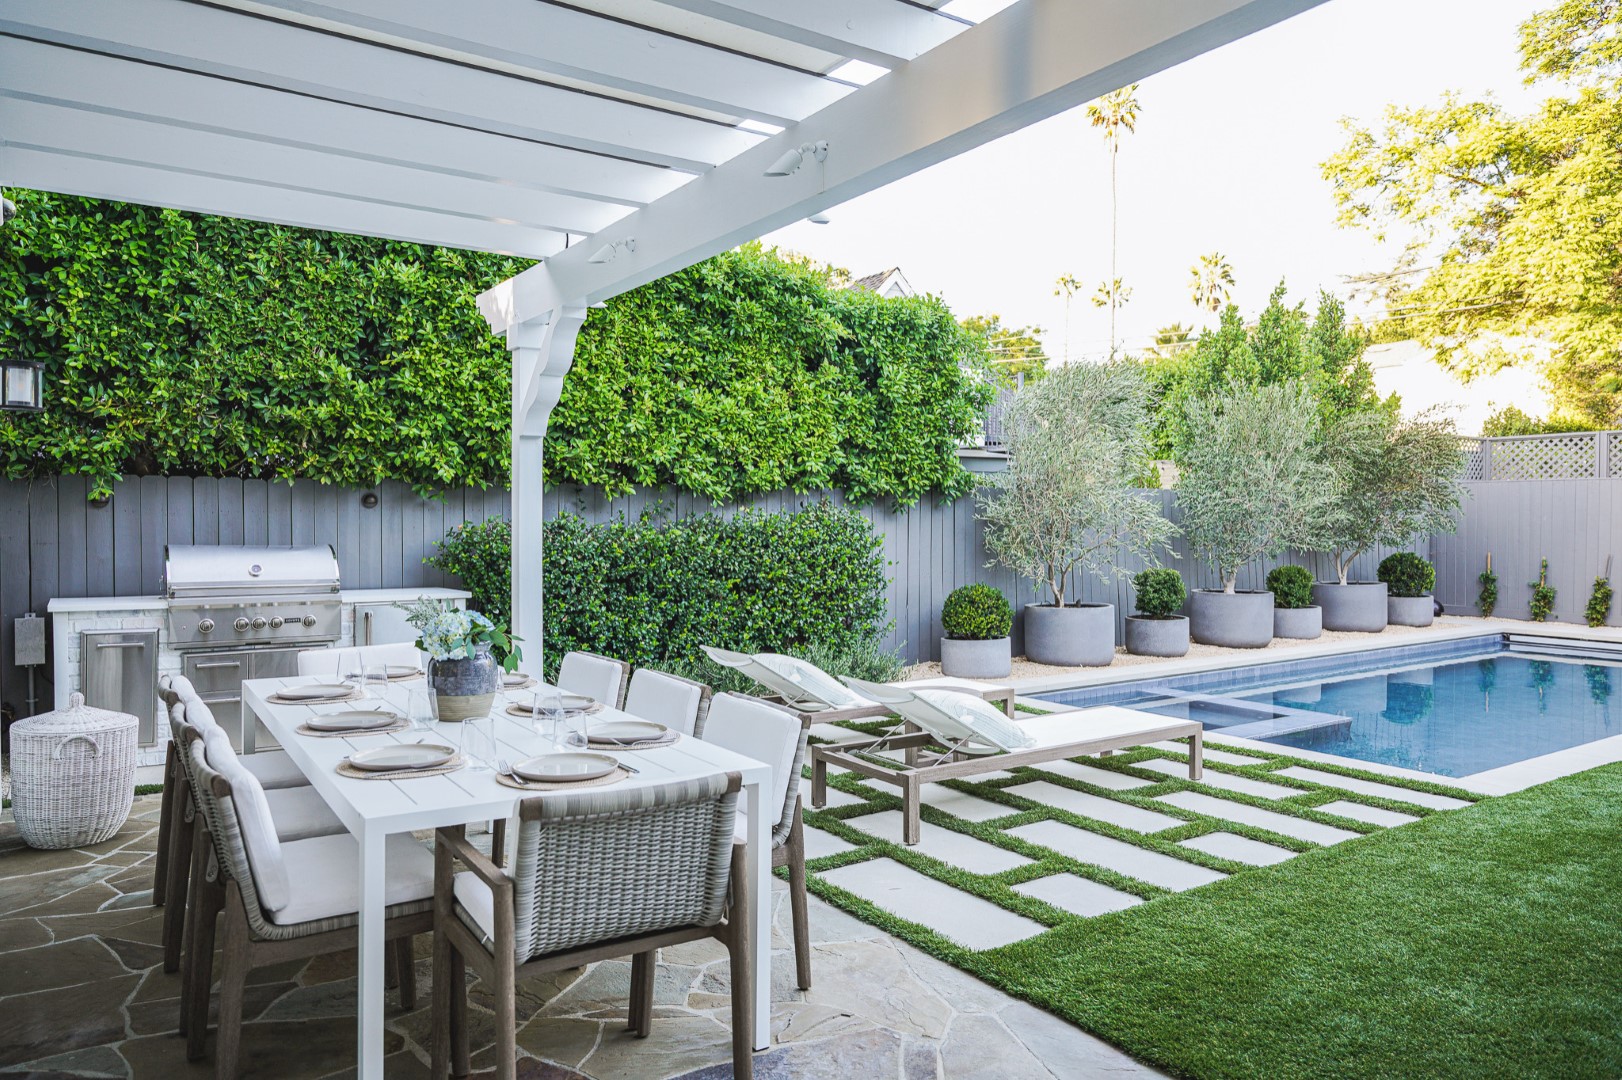 Outdoor Living at Its Finest: 16 Transitional Patio Designs to Inspire Your Space